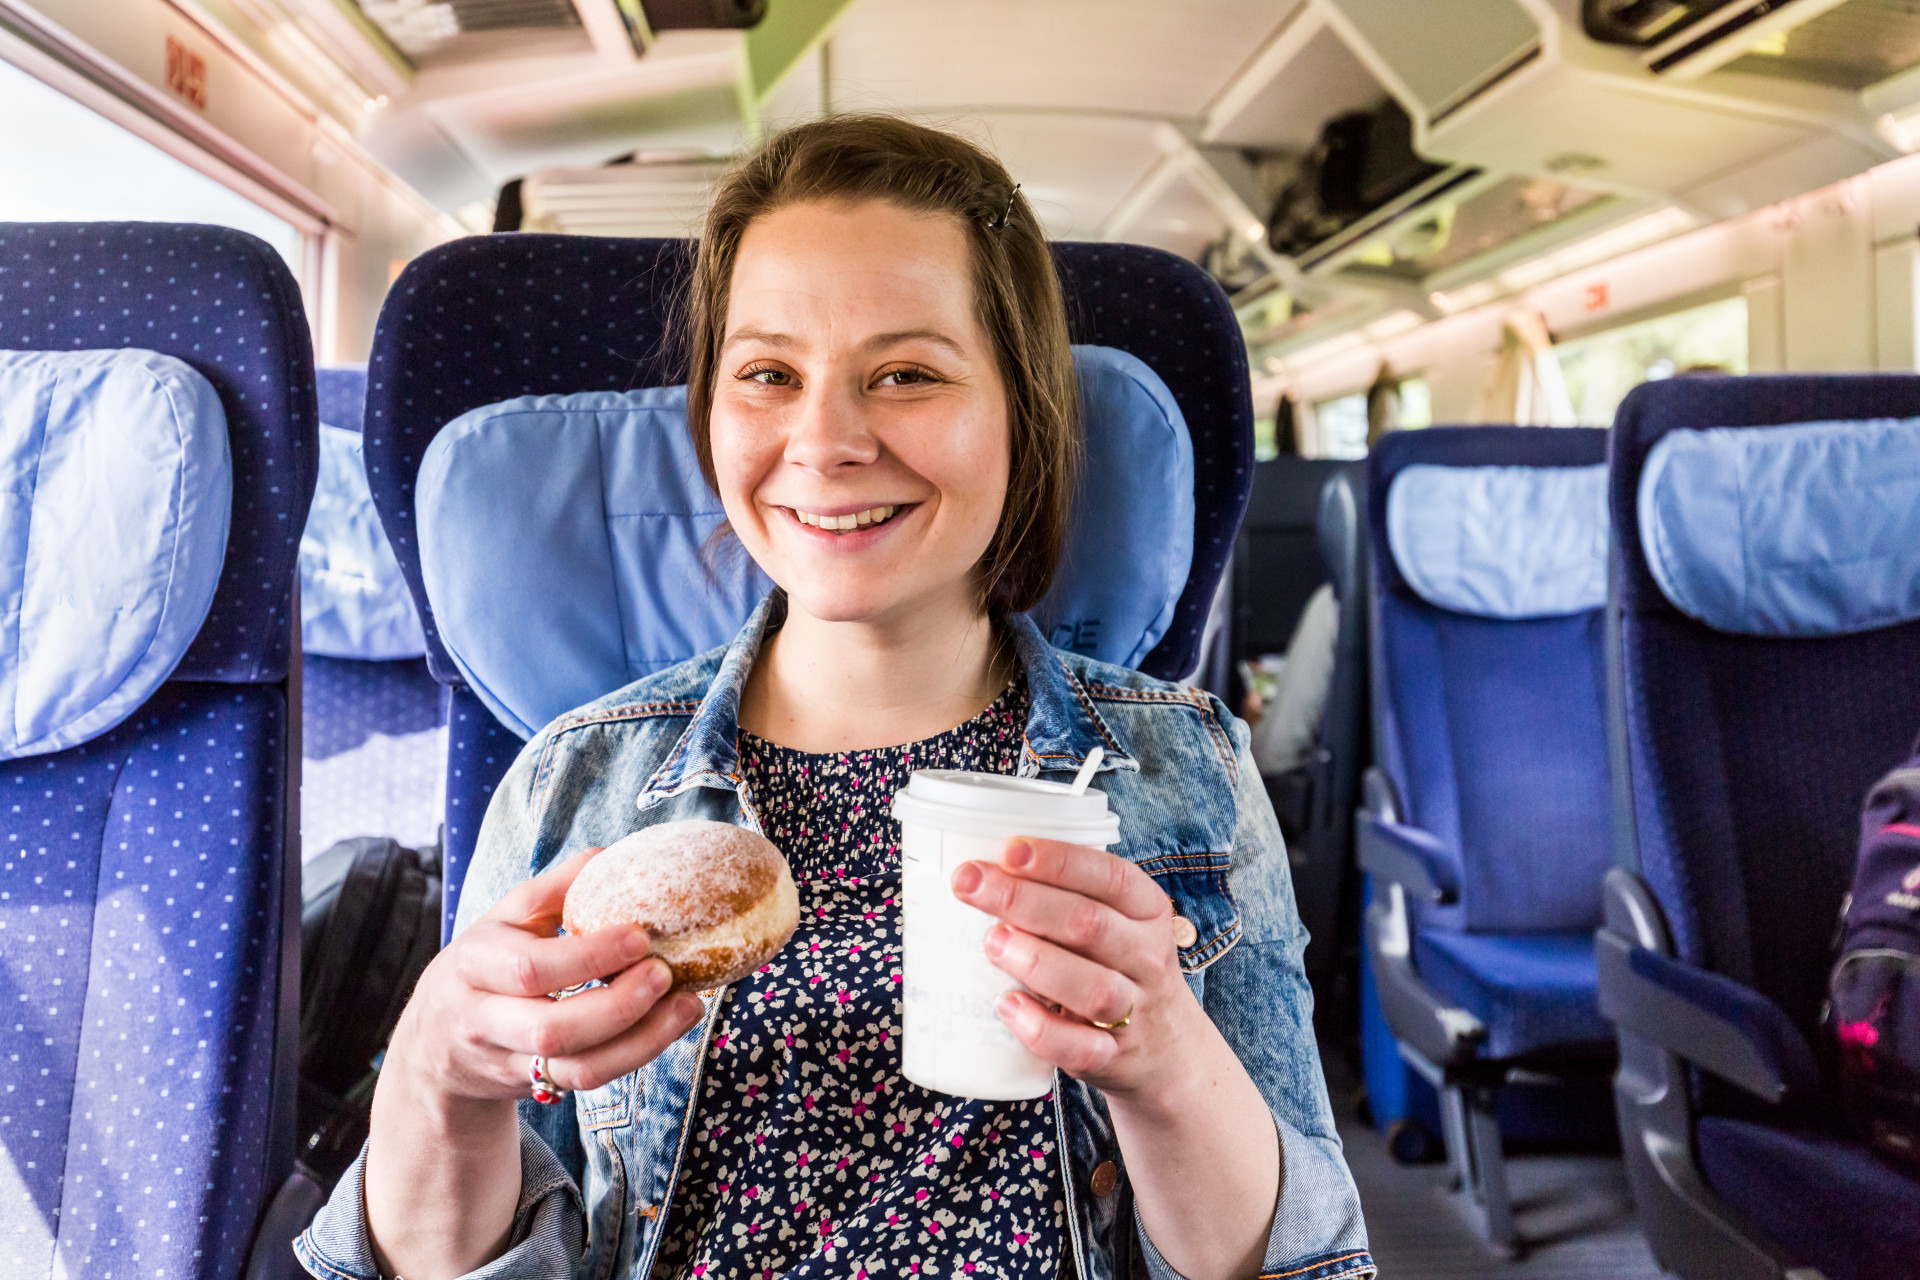 Most countries don't let you bring food or drink on public transports. They may even have signs warning you of this, so make sure you respect the rules.<p>You may also like:<a href="https://www.starsinsider.com/n/323700?utm_source=msn.com&utm_medium=display&utm_campaign=referral_description&utm_content=213265en-en"> Stars out of water: Celebs who can't swim</a></p>